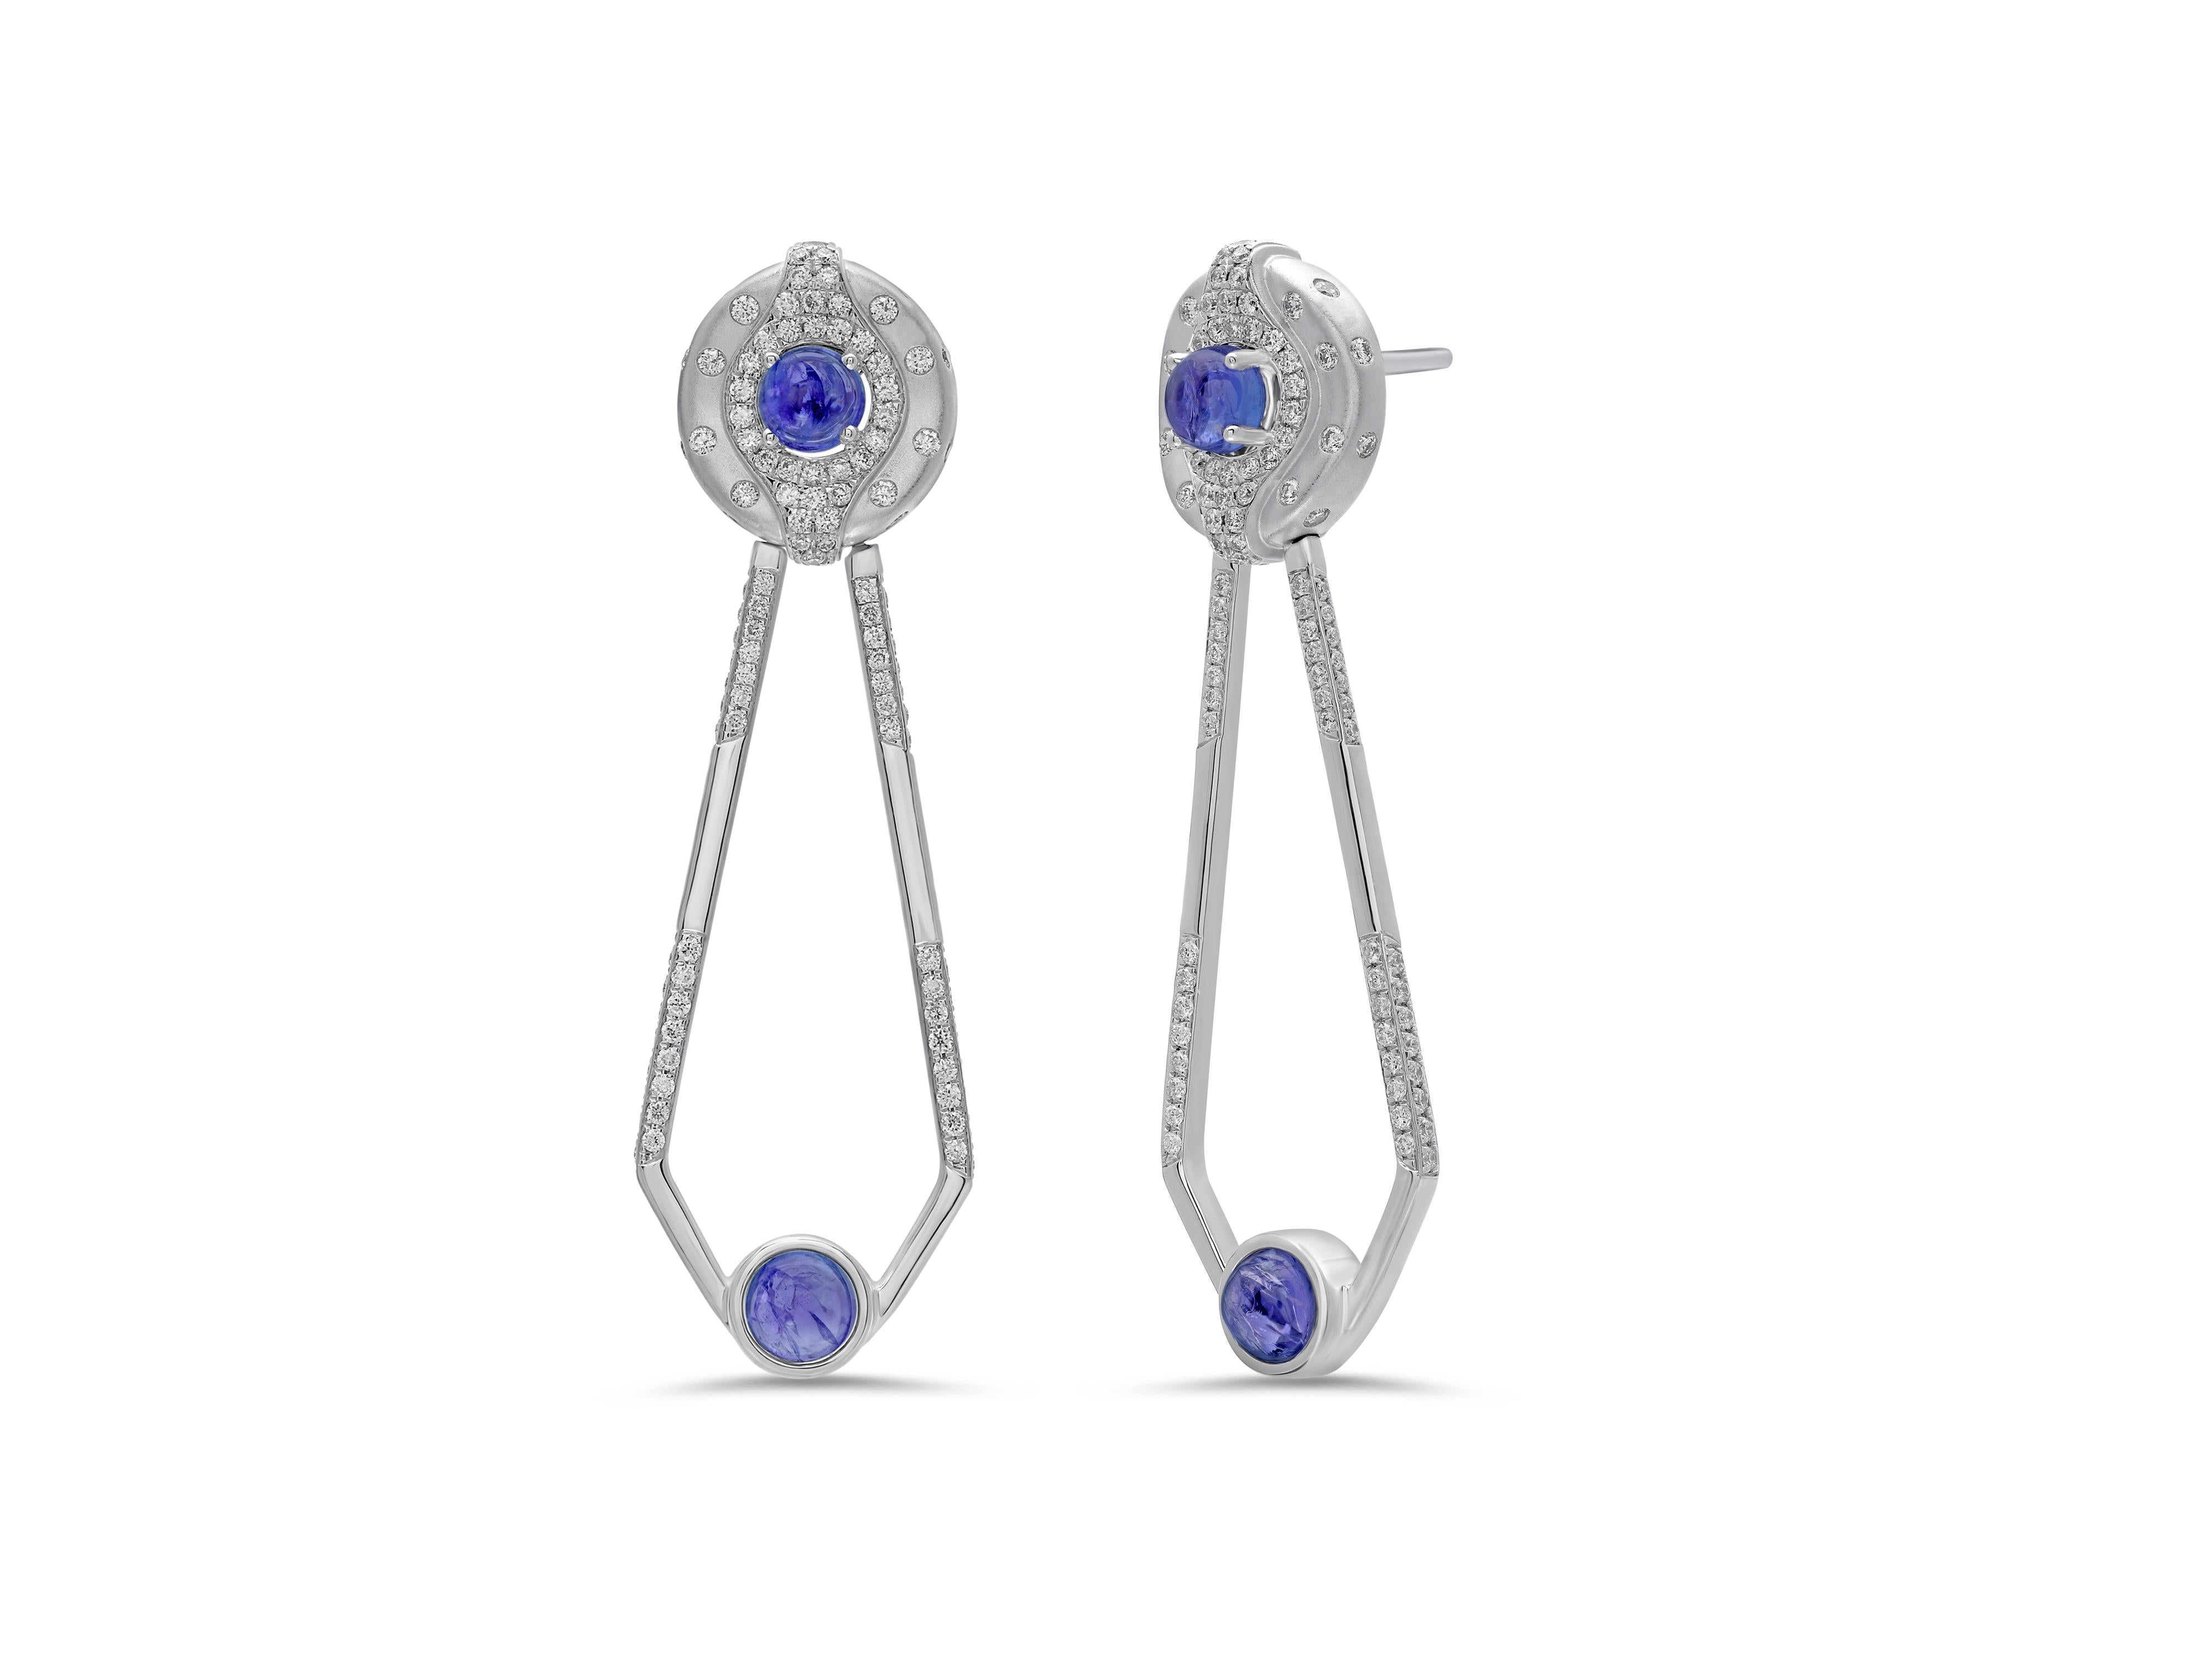 A distinct gemstone setting and varying textures combine to create the playful yet sophisticated look of Atelo’s Gypsy Collection.

These diamond earrings with tanzanite cabochons use various textured gold finishes and the distinct “gypsy” setting,